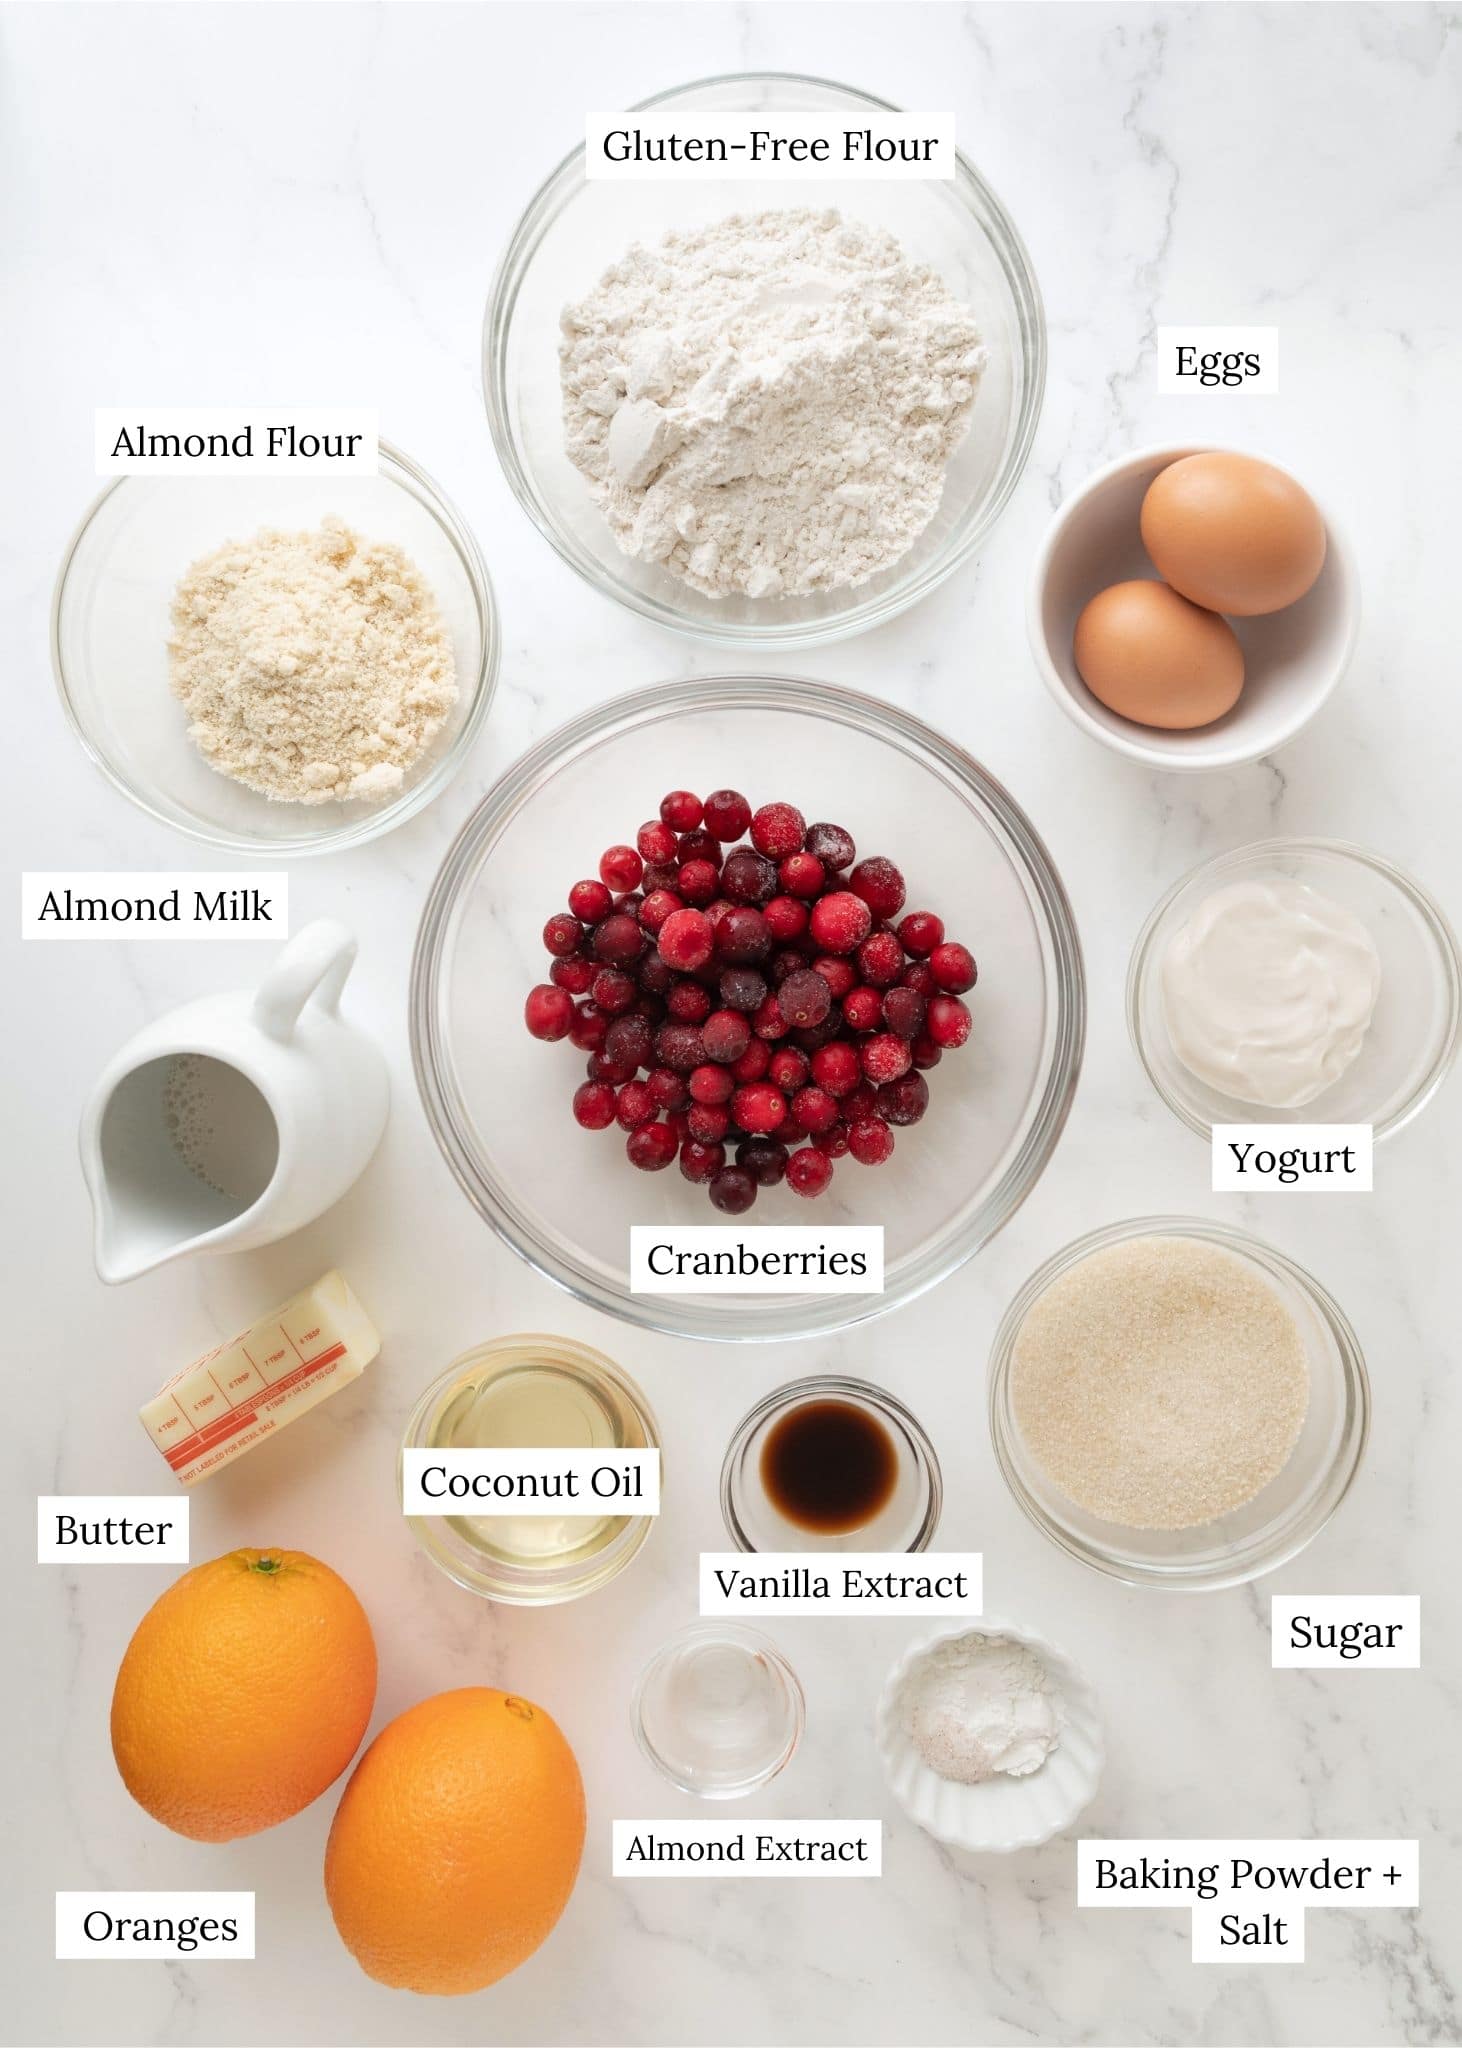 Cranberry orange muffin ingredients. A large clear bowl with cranberries next to a bowl with flour, almond flour, eggs, yogurt, milk, butter, coconut oil, navel oranges, extracts, baking powder, salt, and sugar.